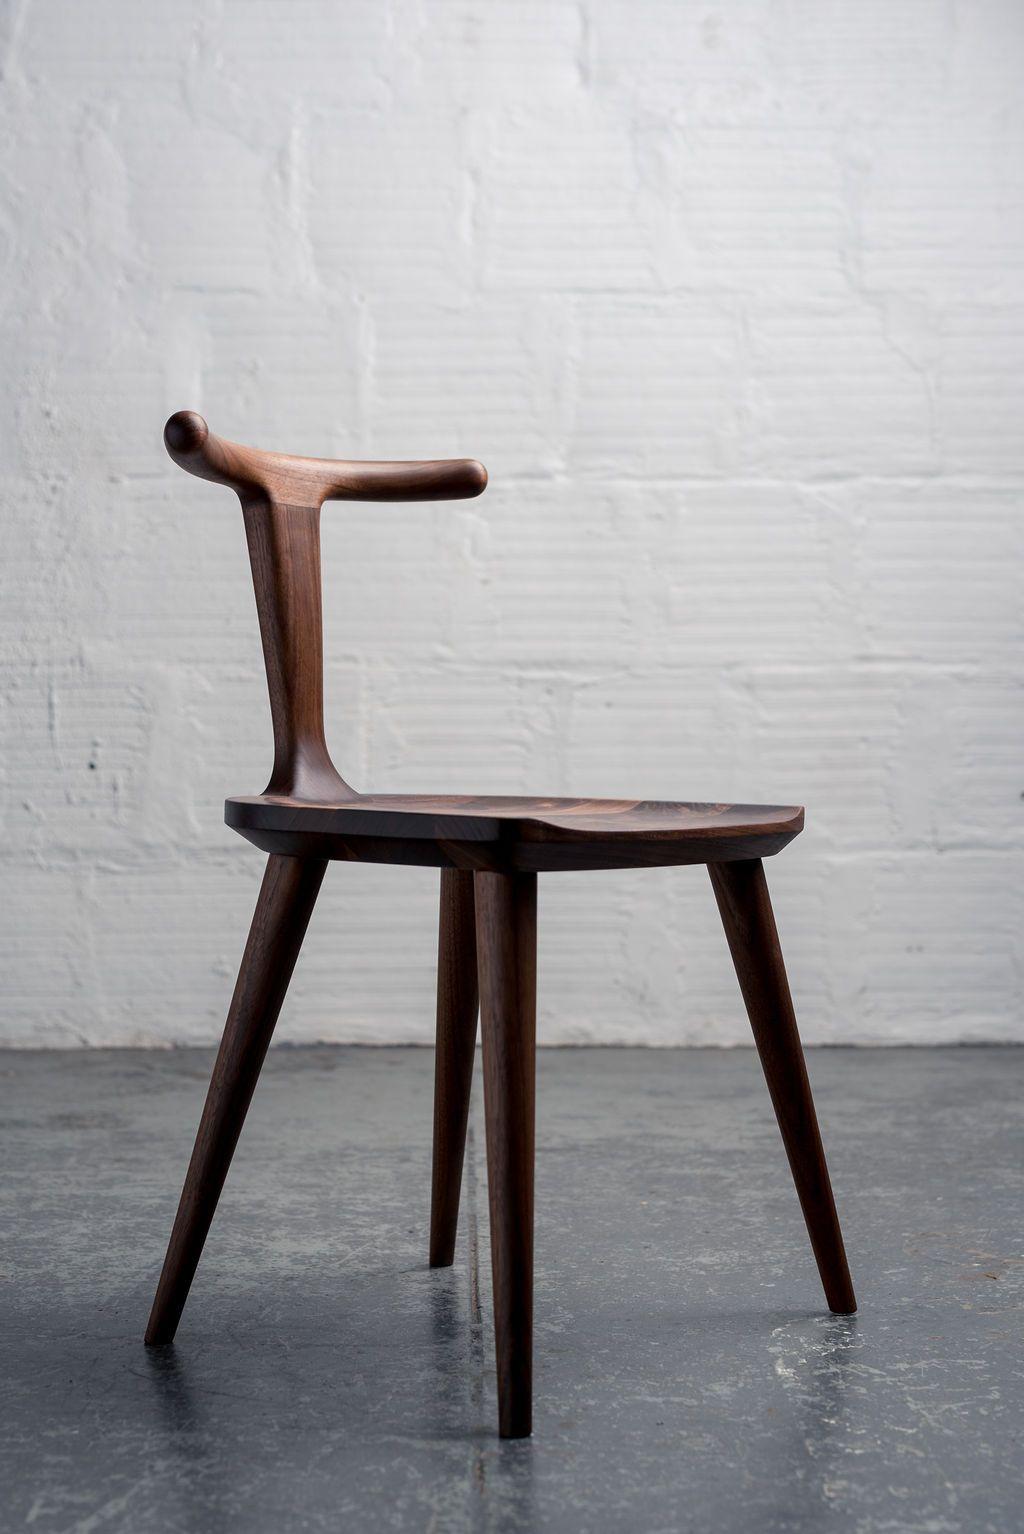 Other Walnut Oxbend Chair with Leather Seat Pad by Fernweh Woodworking